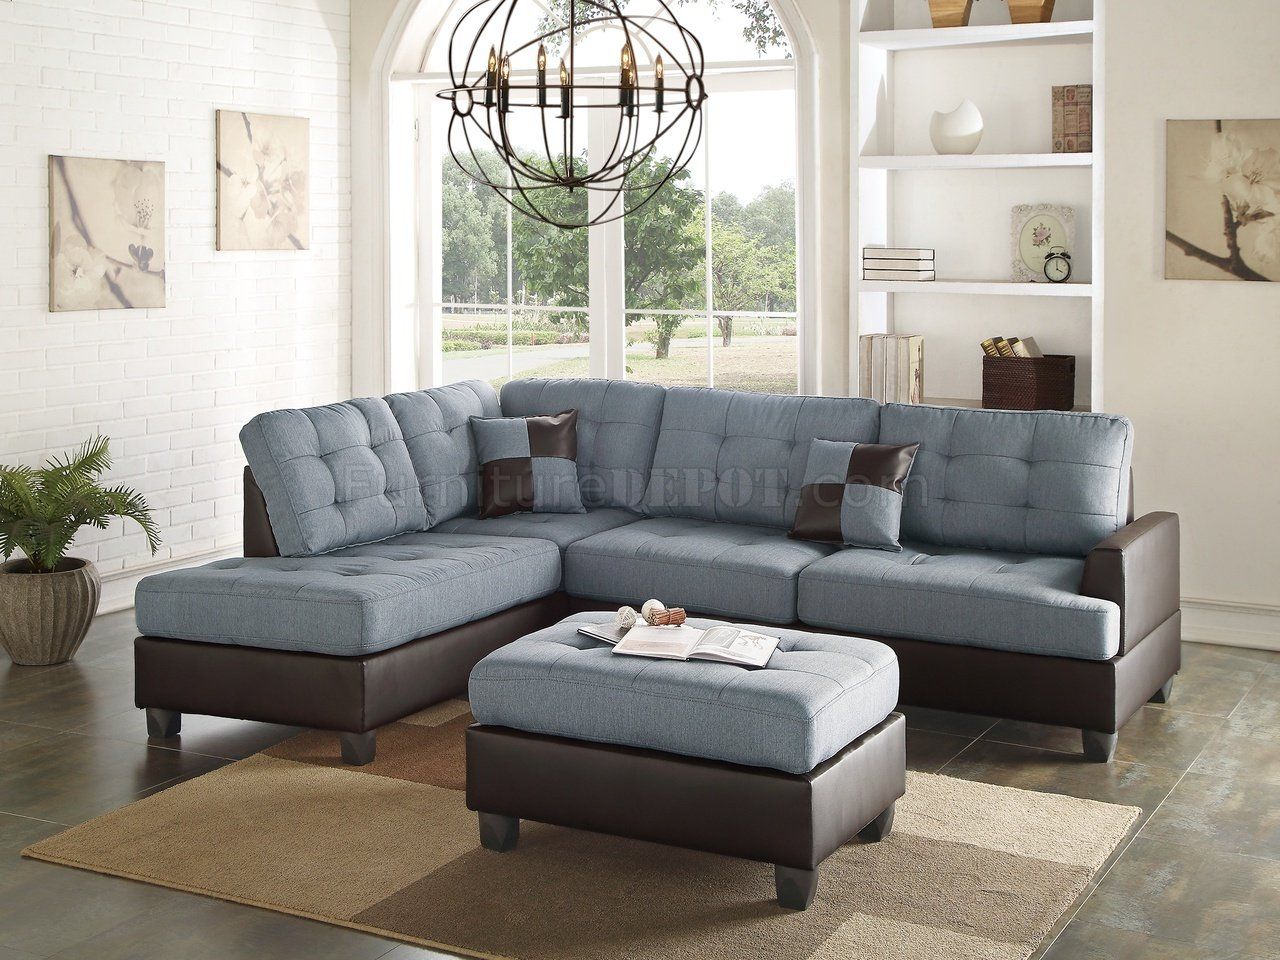 F6858 Sectional Sofa 3pc In Grey Fabricboss Intended For Sectional Sofas In Gray (View 2 of 15)